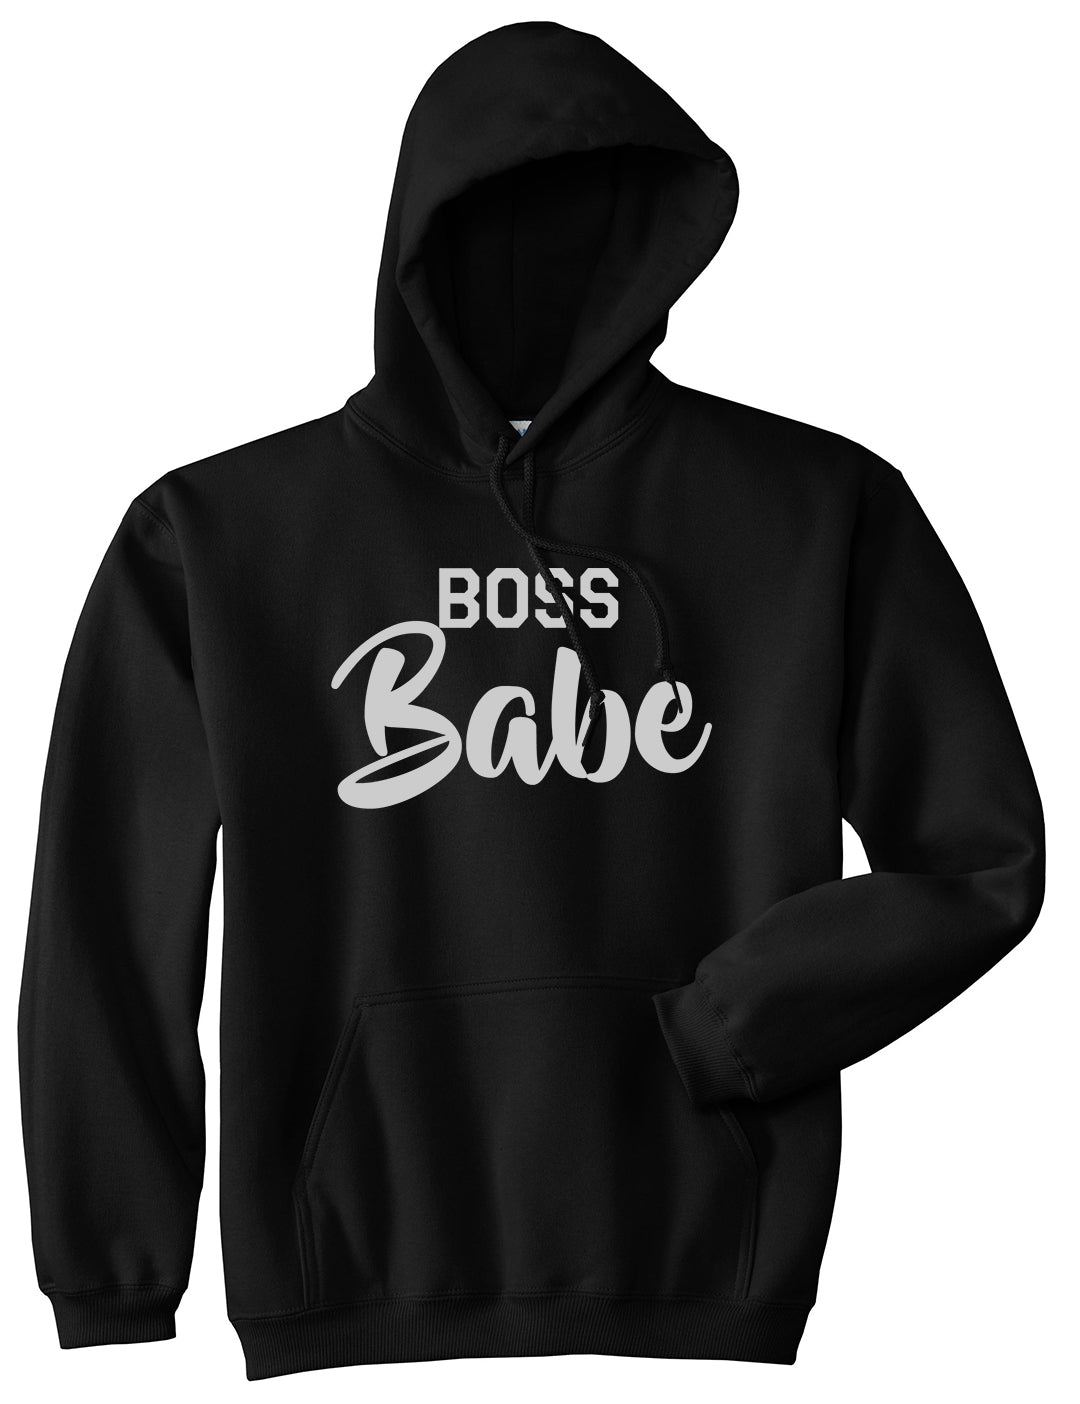 Boss Babe Mens Black Pullover Hoodie by KINGS OF NY